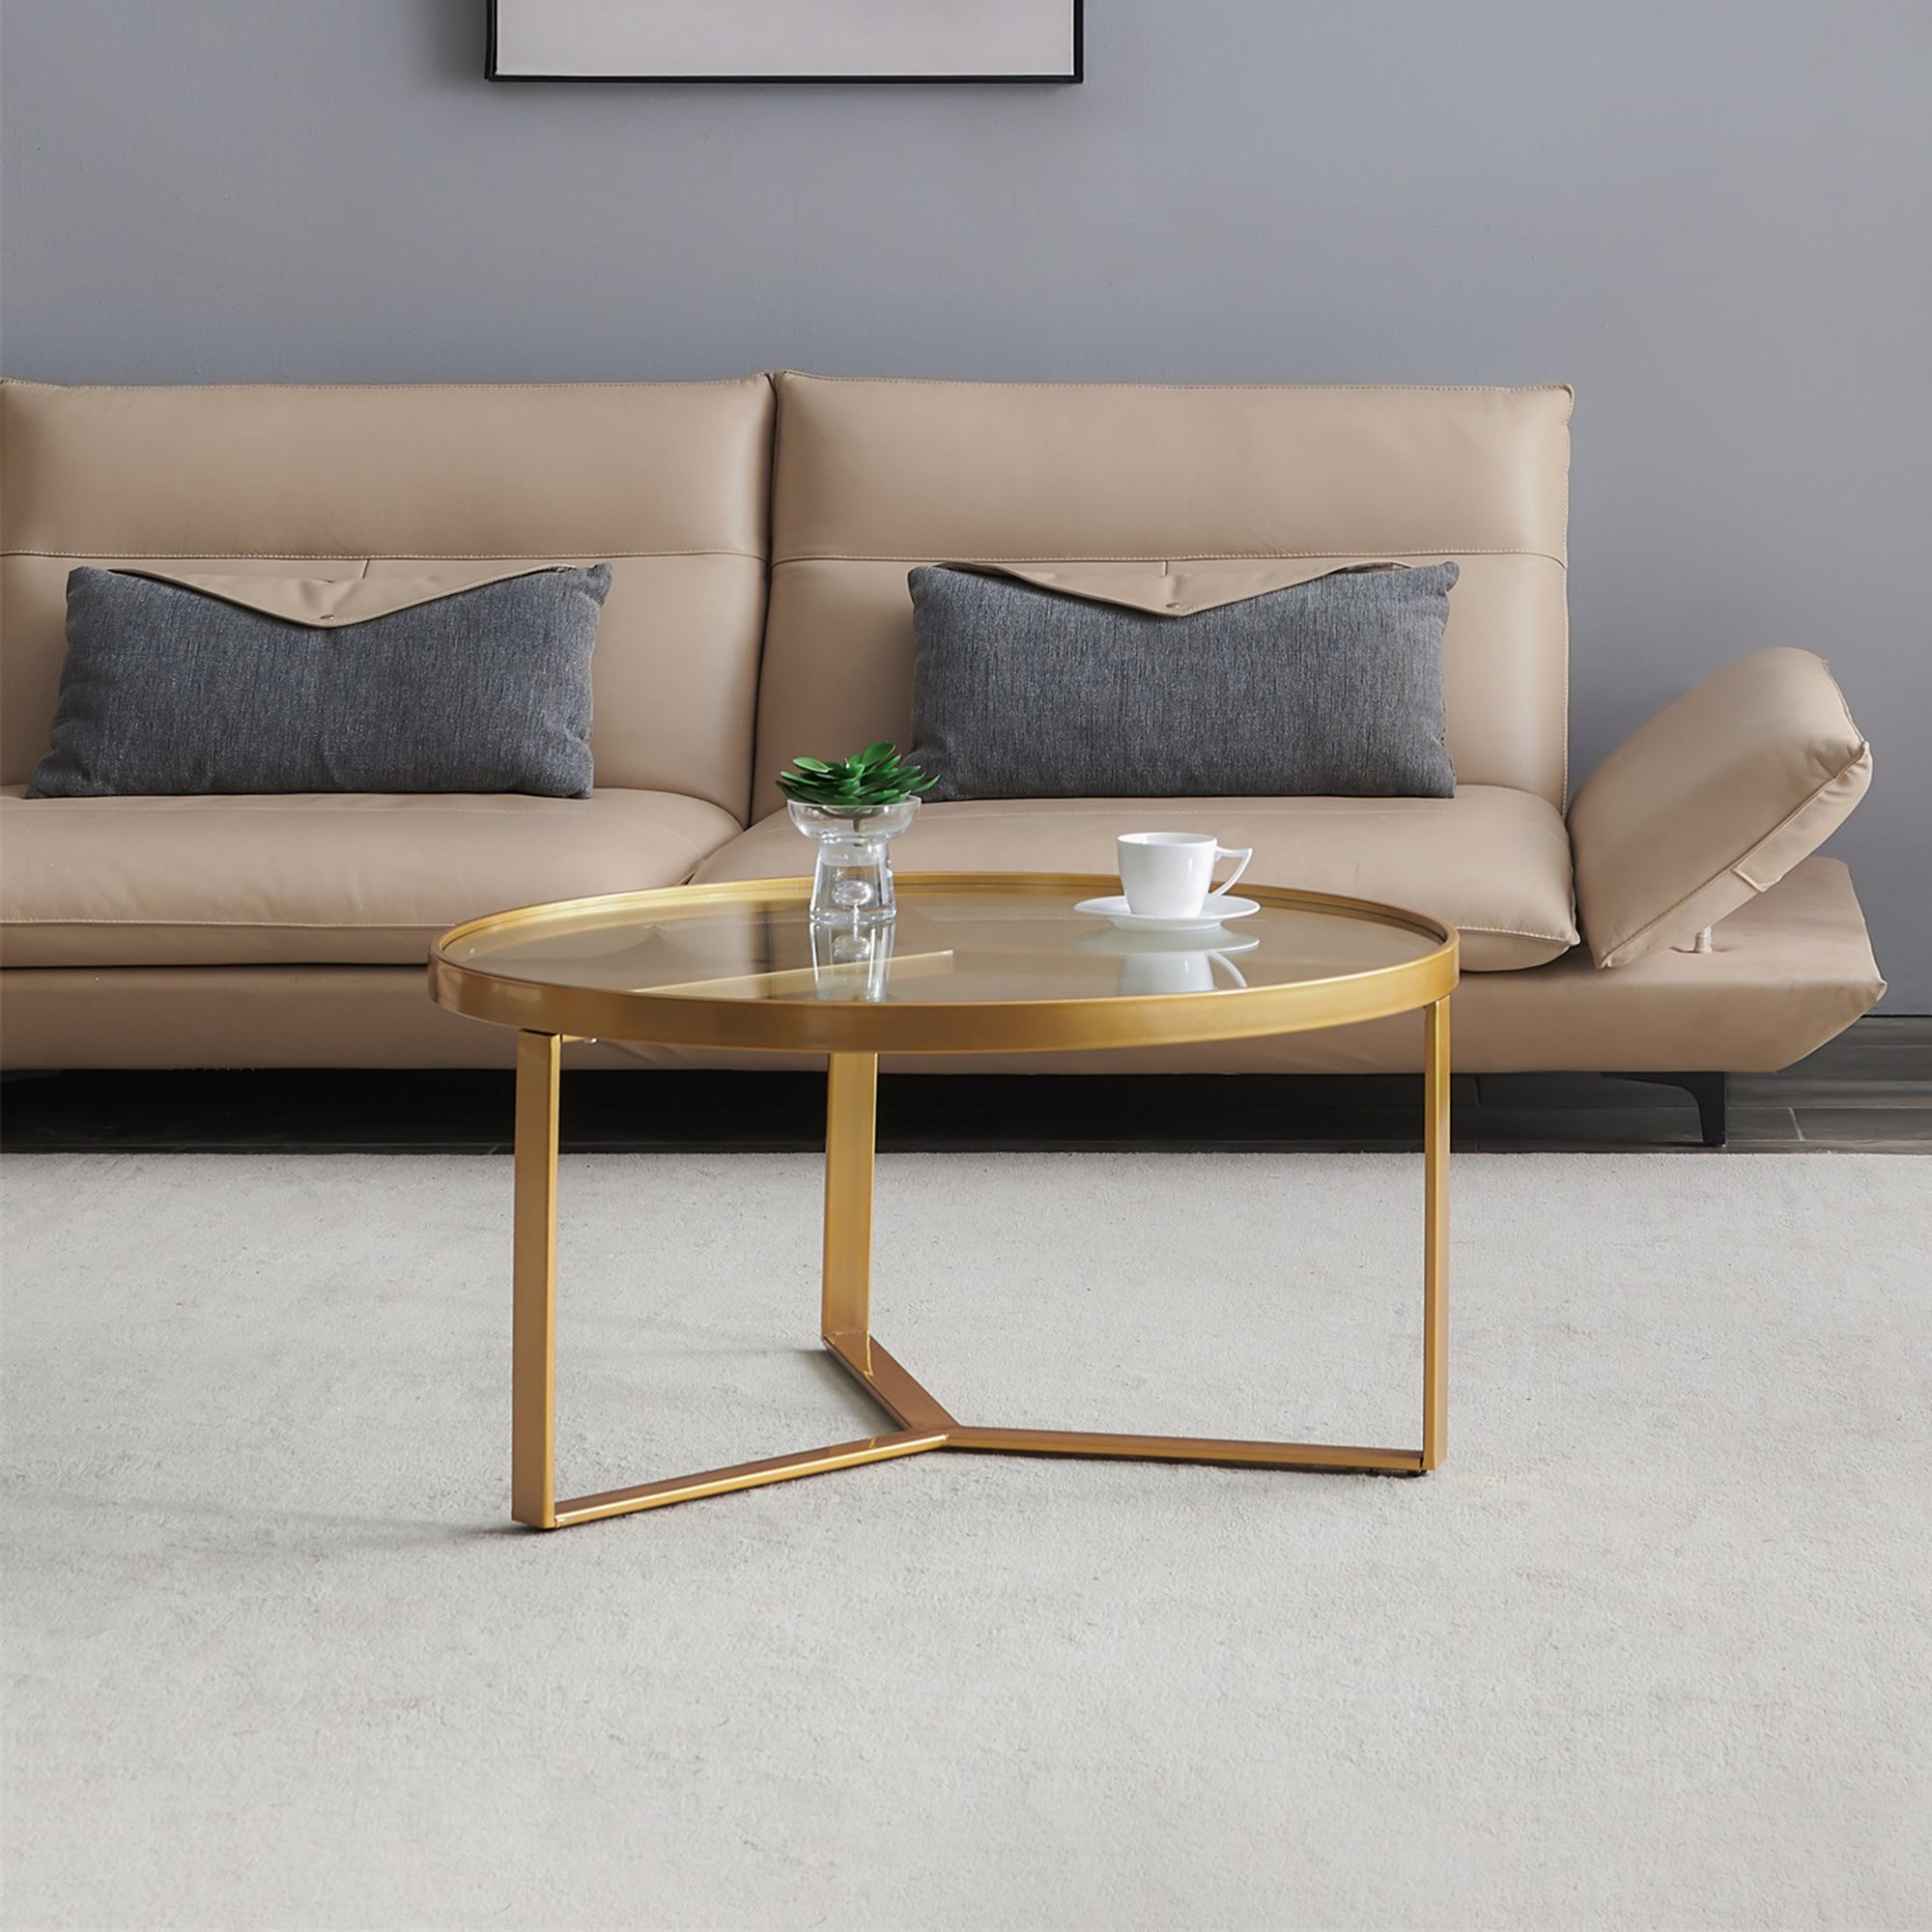 Modern coffee table,Golden metal frame with round tempered glass tabletop